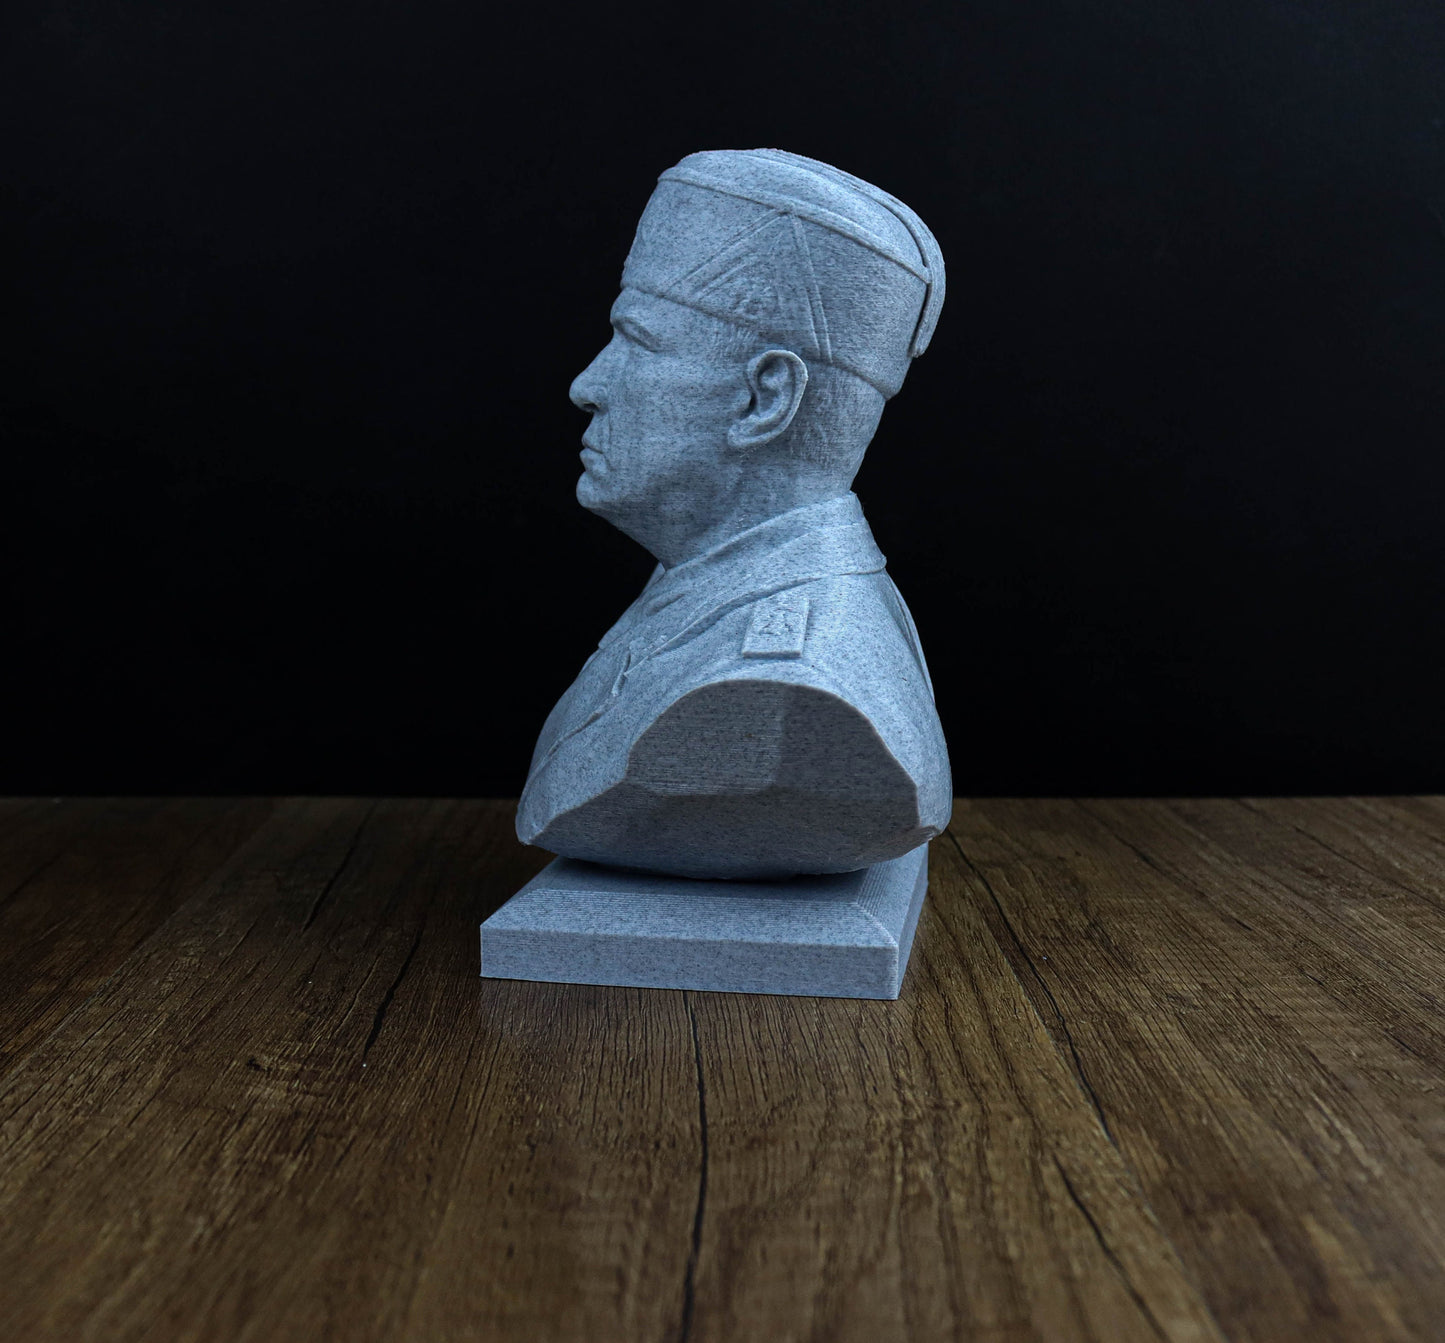 Benito Mussolini Bust, Il Duce Statue, Former Prime Minister of Italy